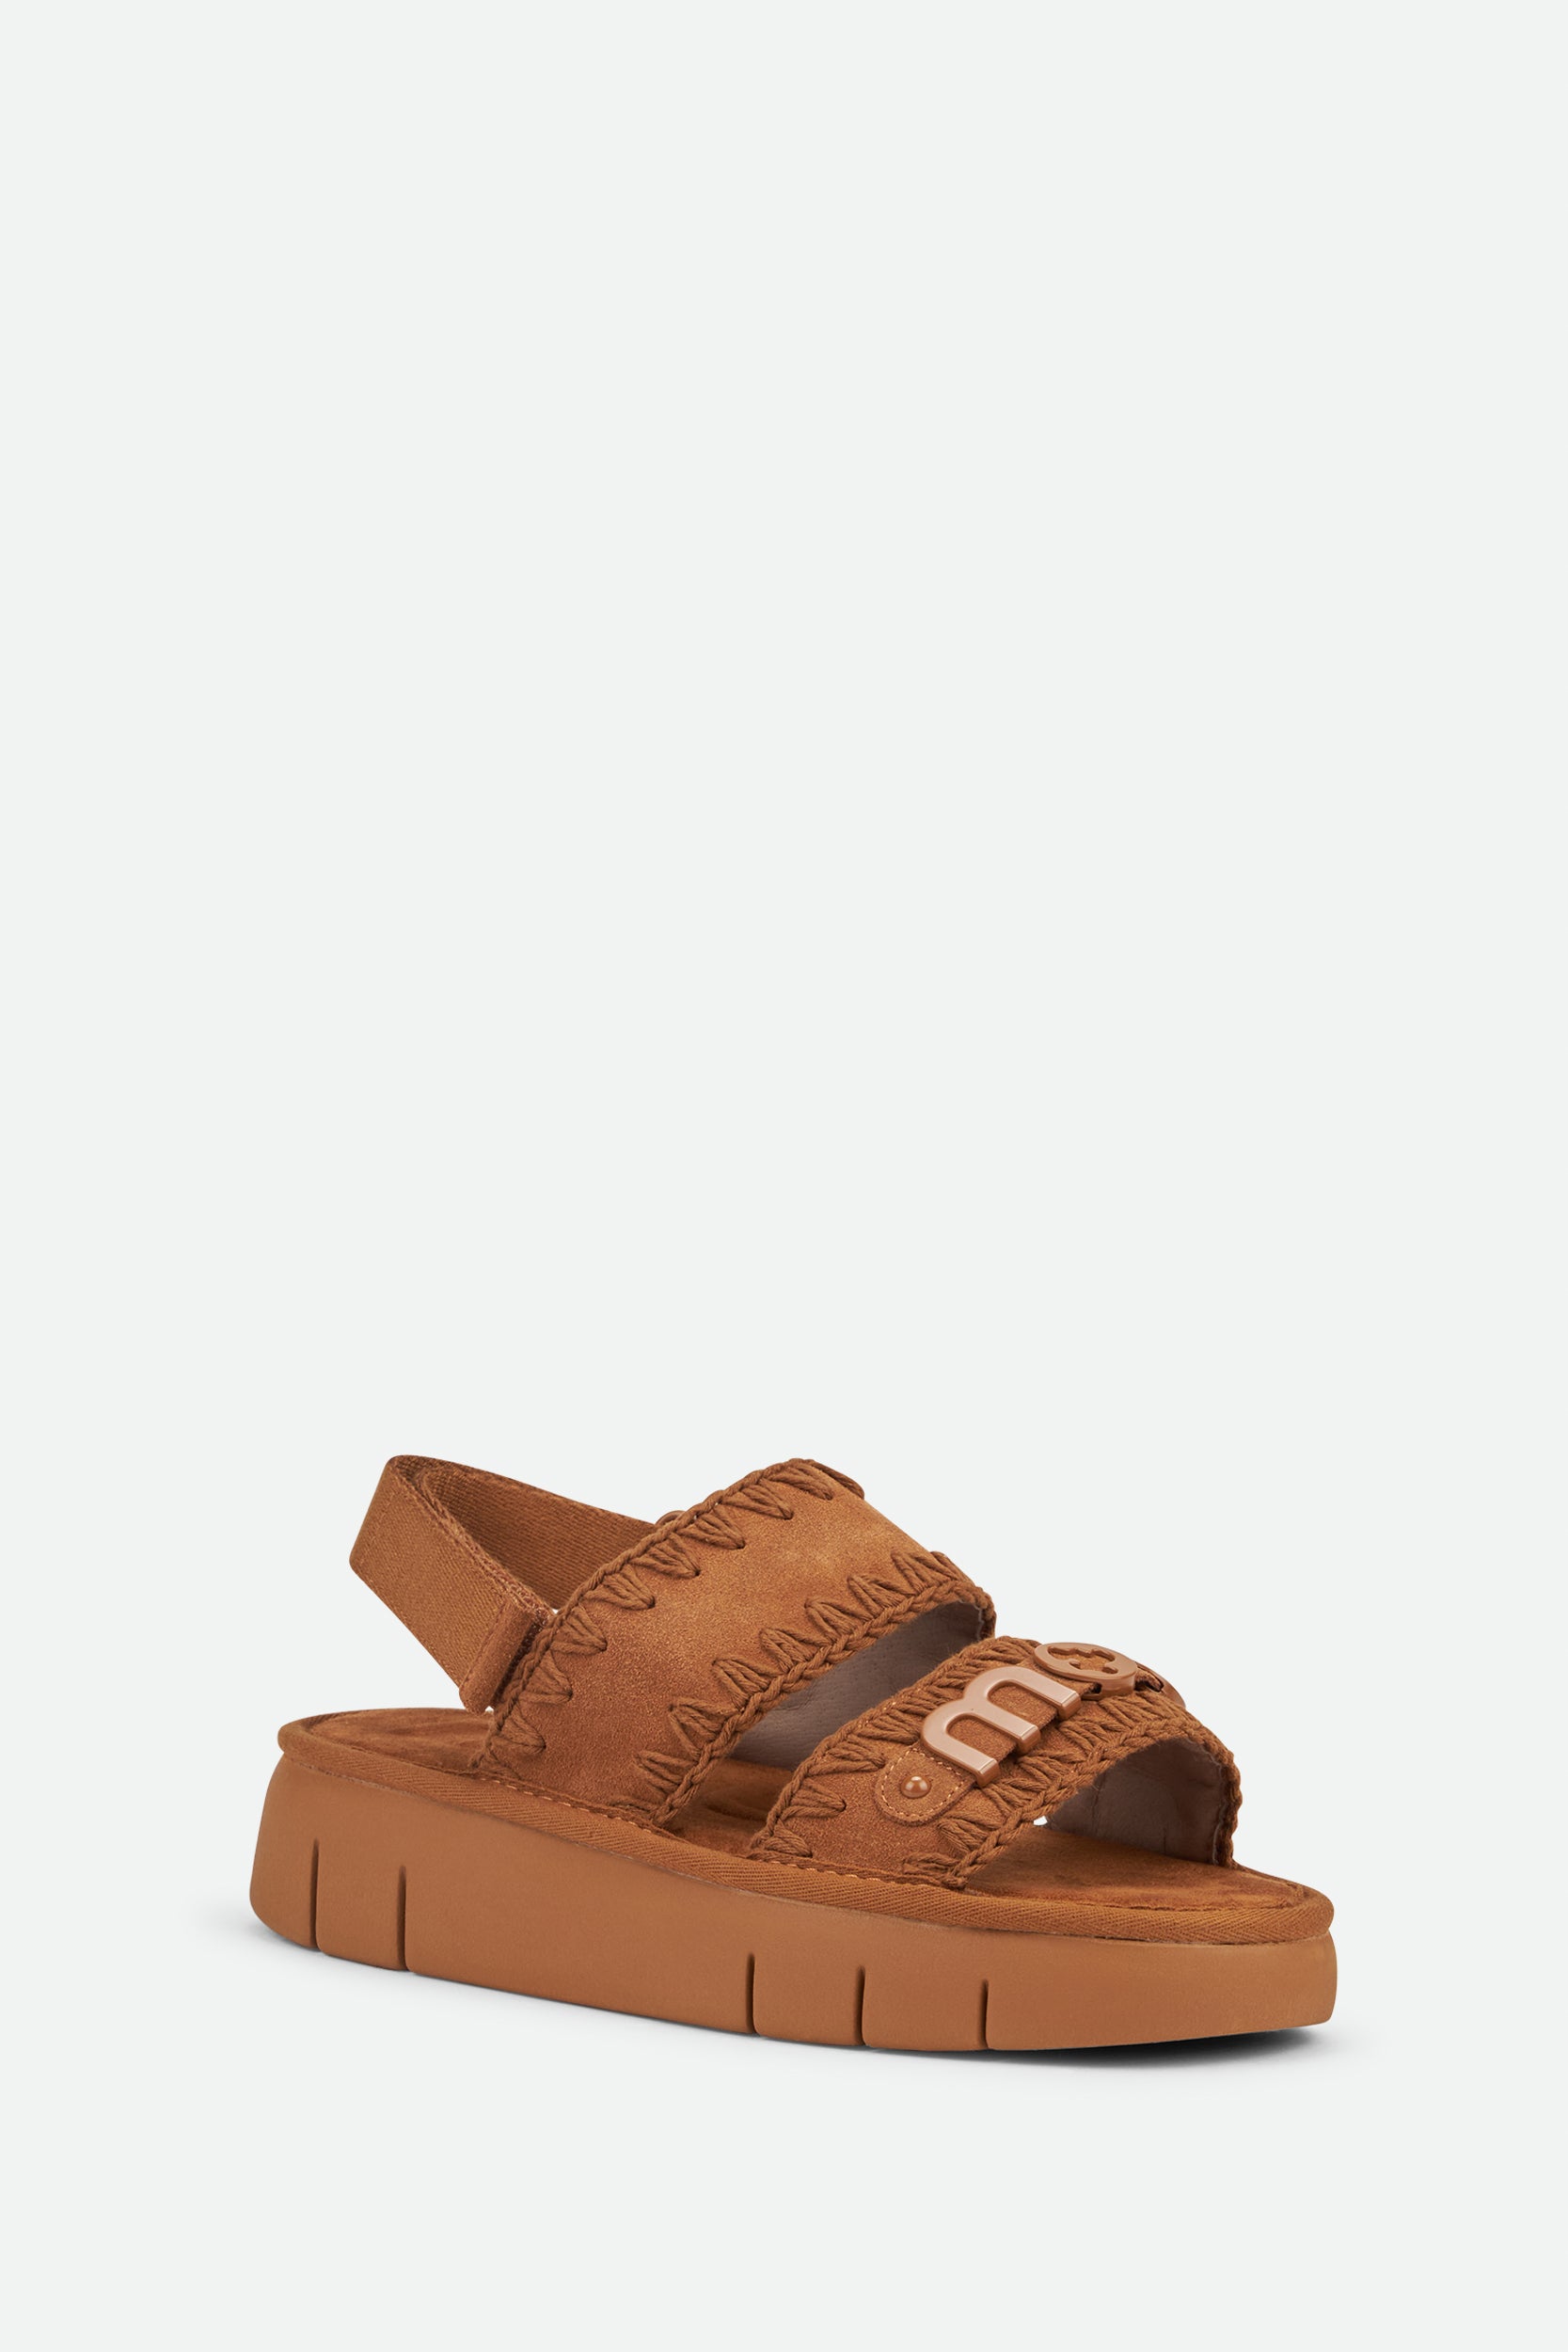 Mou Bounce Brown Sandals